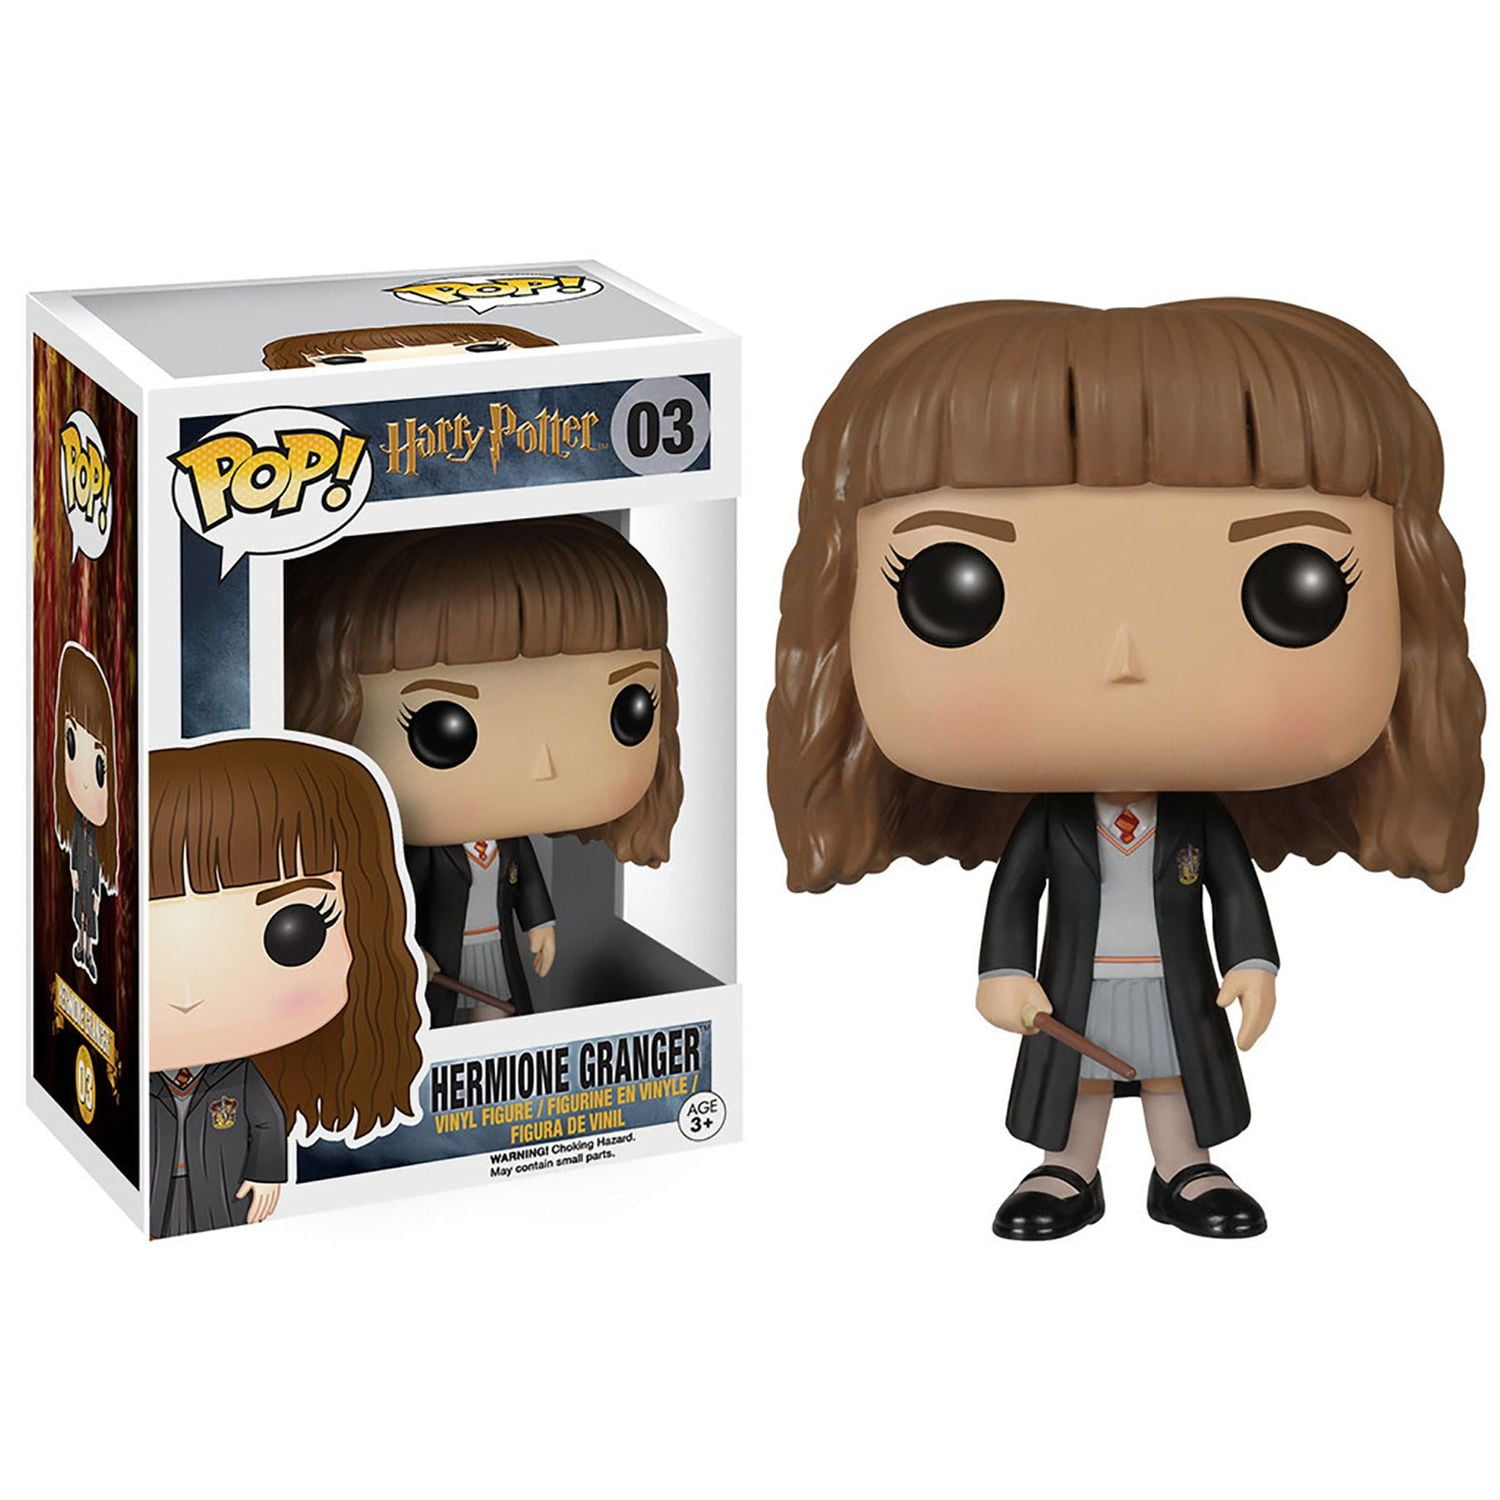 Buy FUNKO POP! MOVIES: Harry Potter S4 - Hermione with Time Turner